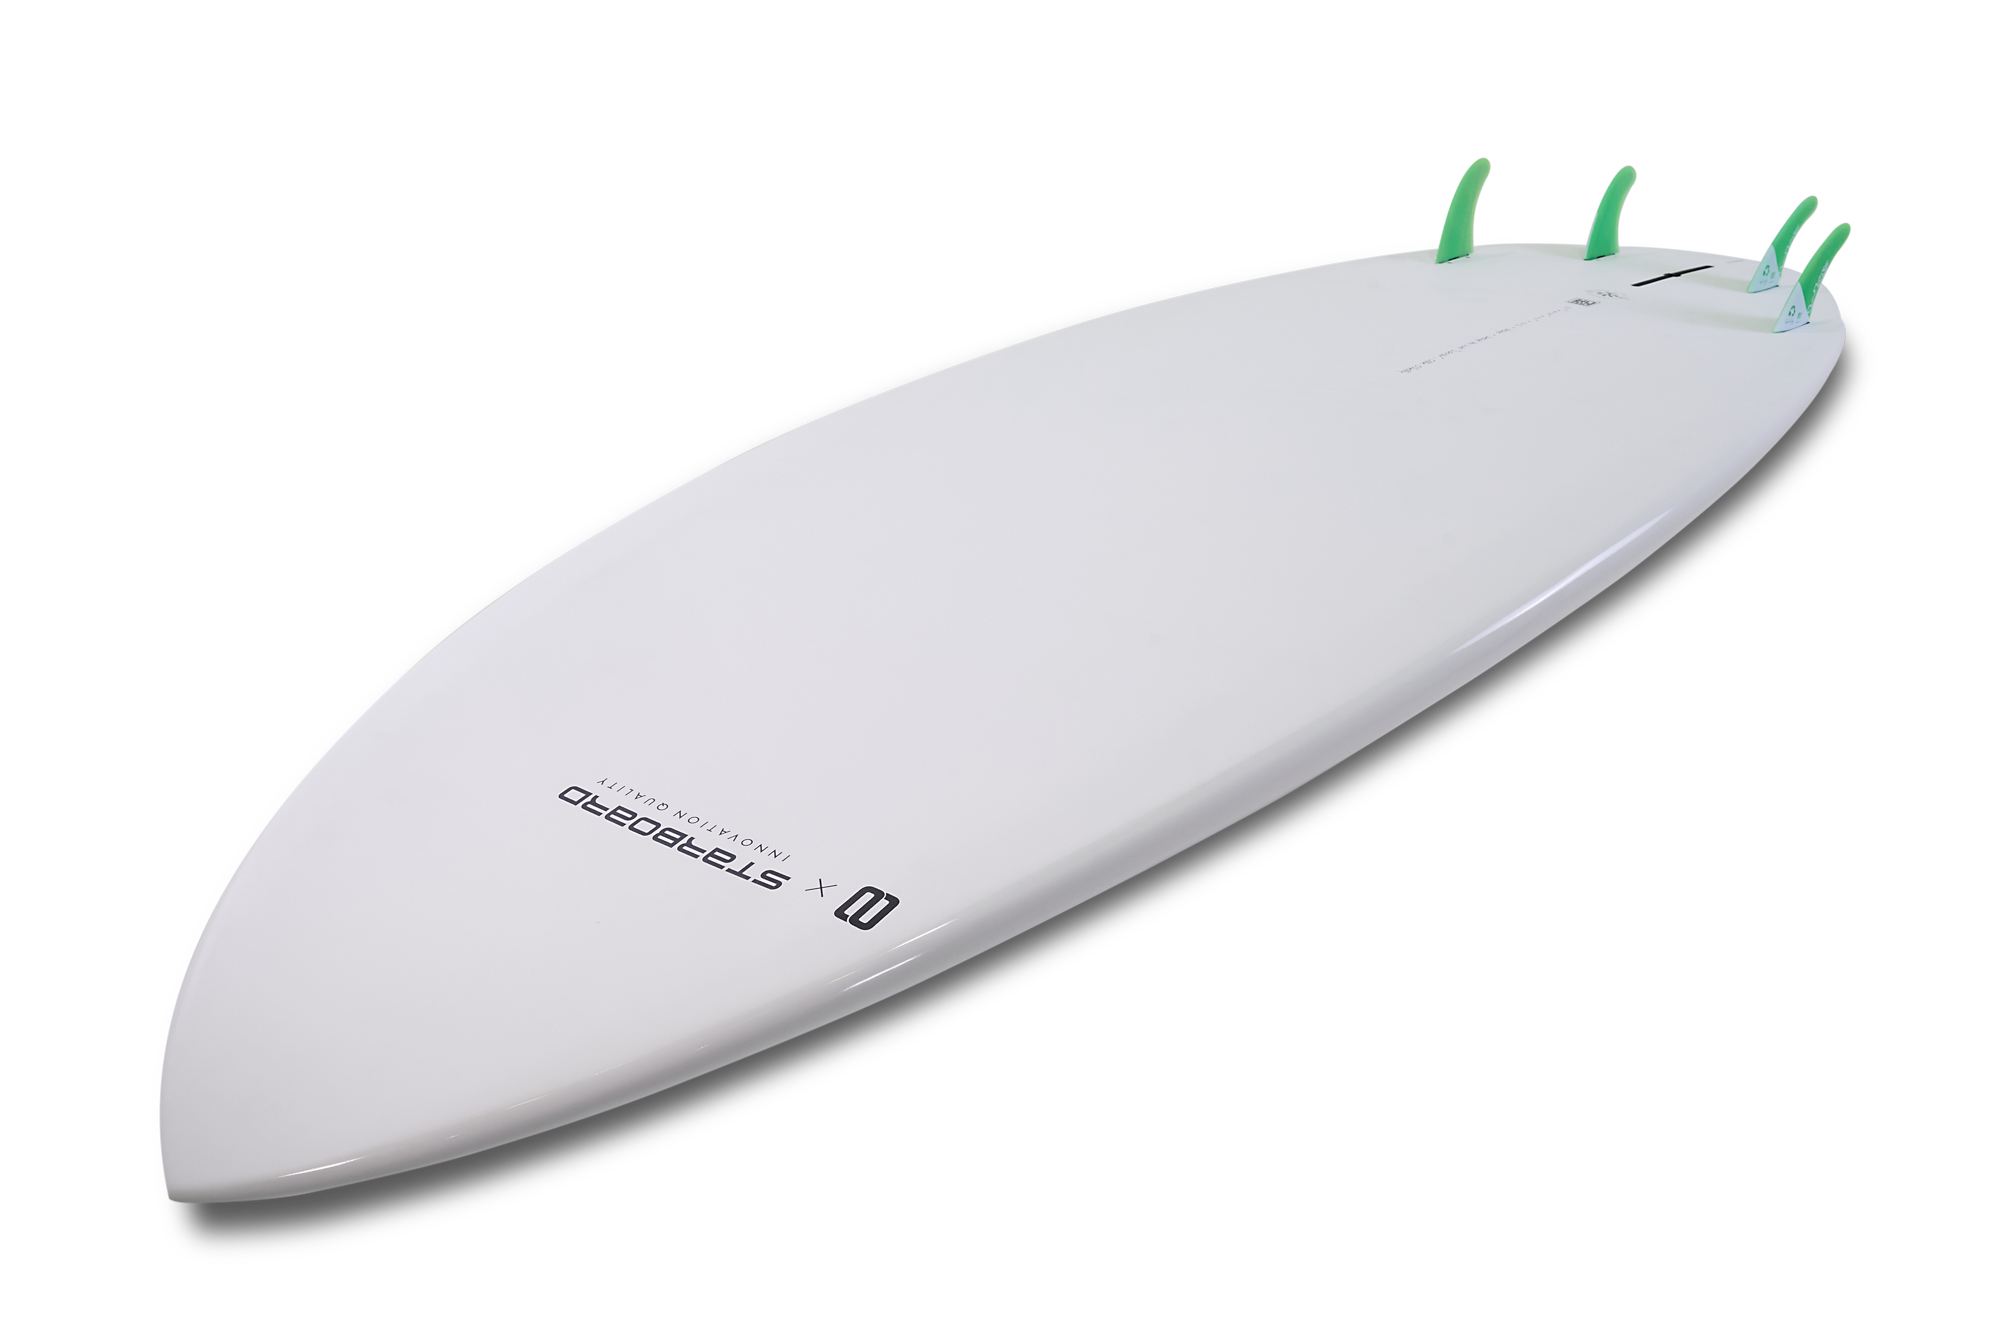 STARBOARD - SPICE LIMITED SERIES 8'8"